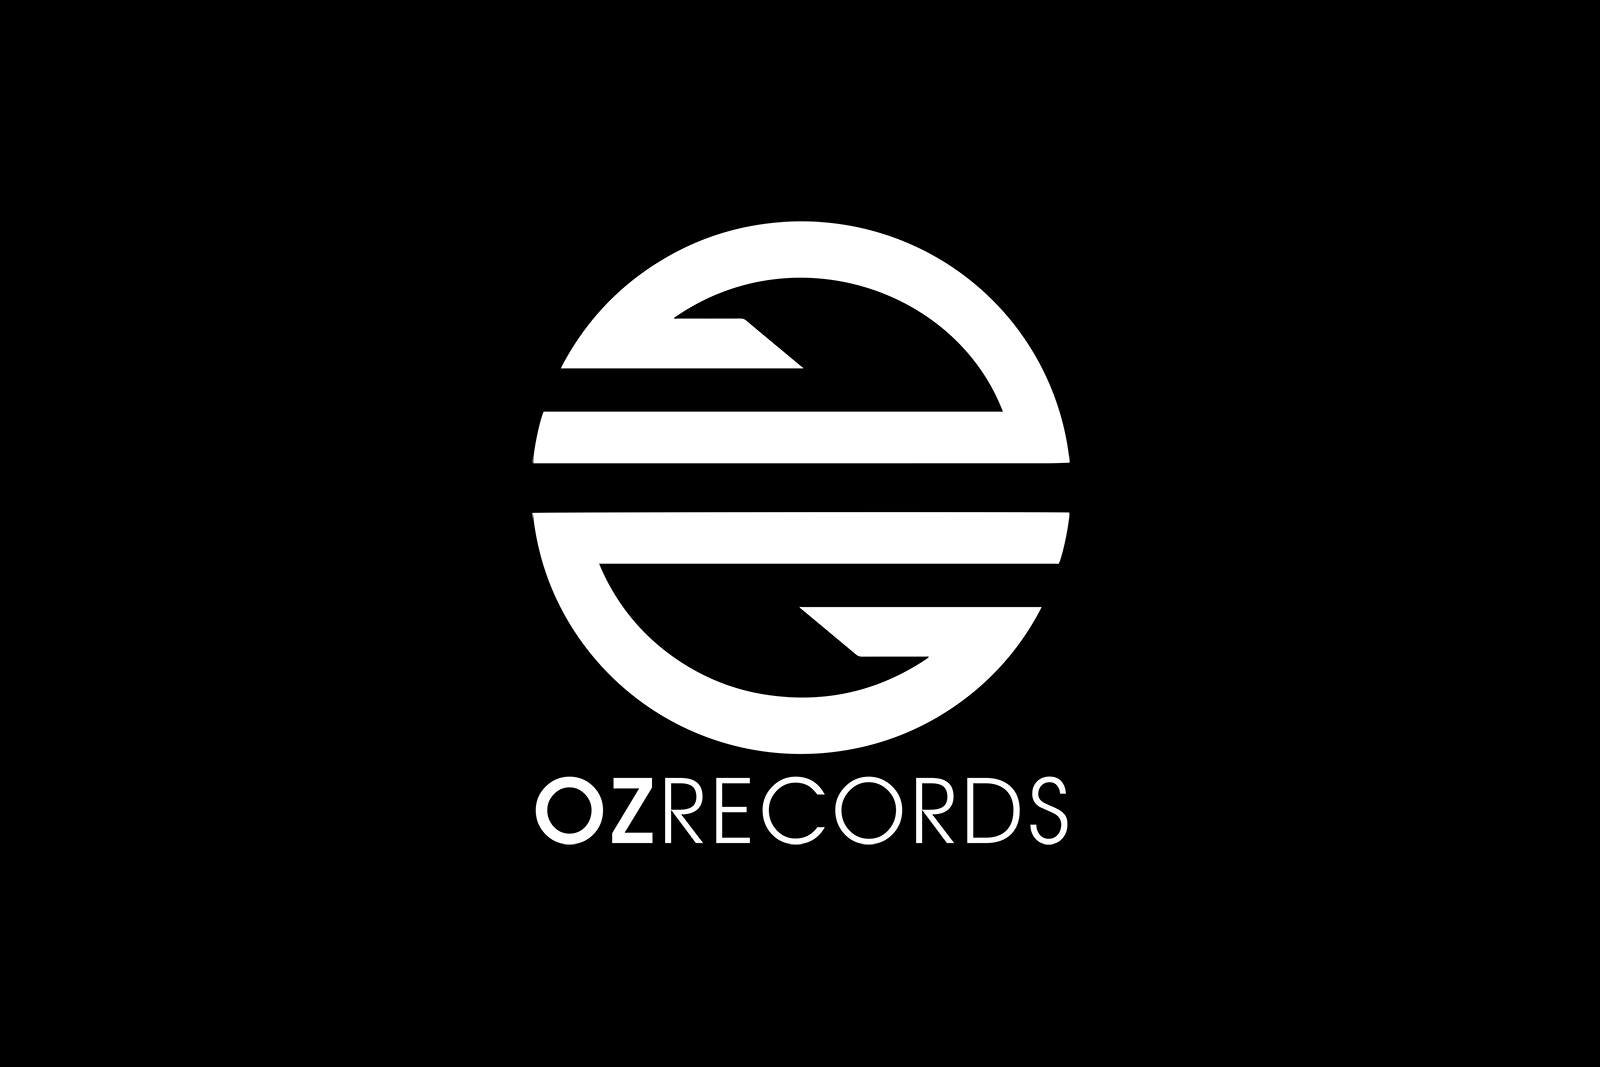 Welcome to Oz Records - Ummet Ozcan